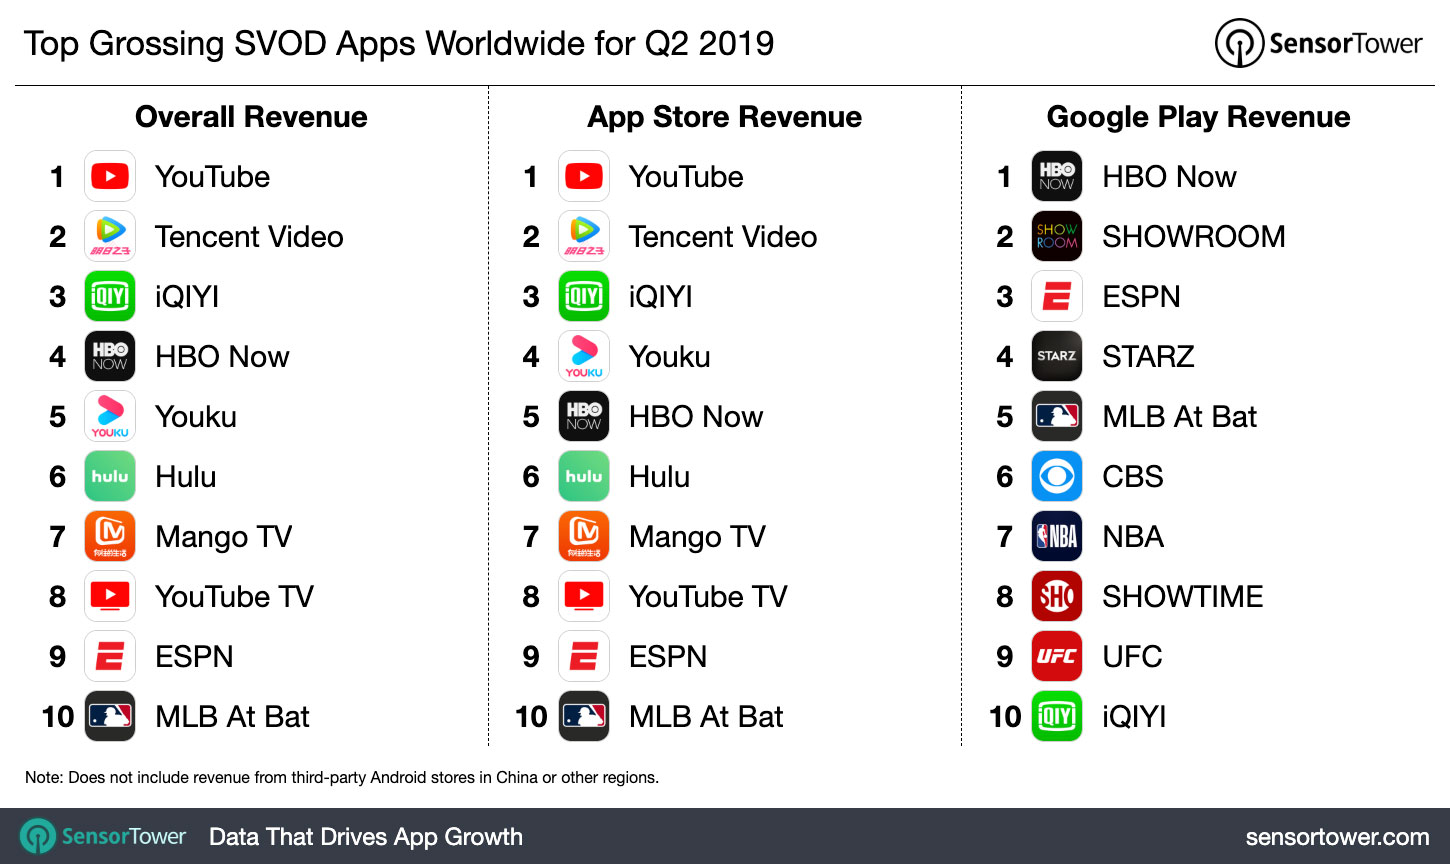 Top Grossing SVOD Apps Worldwide for Q2 2019